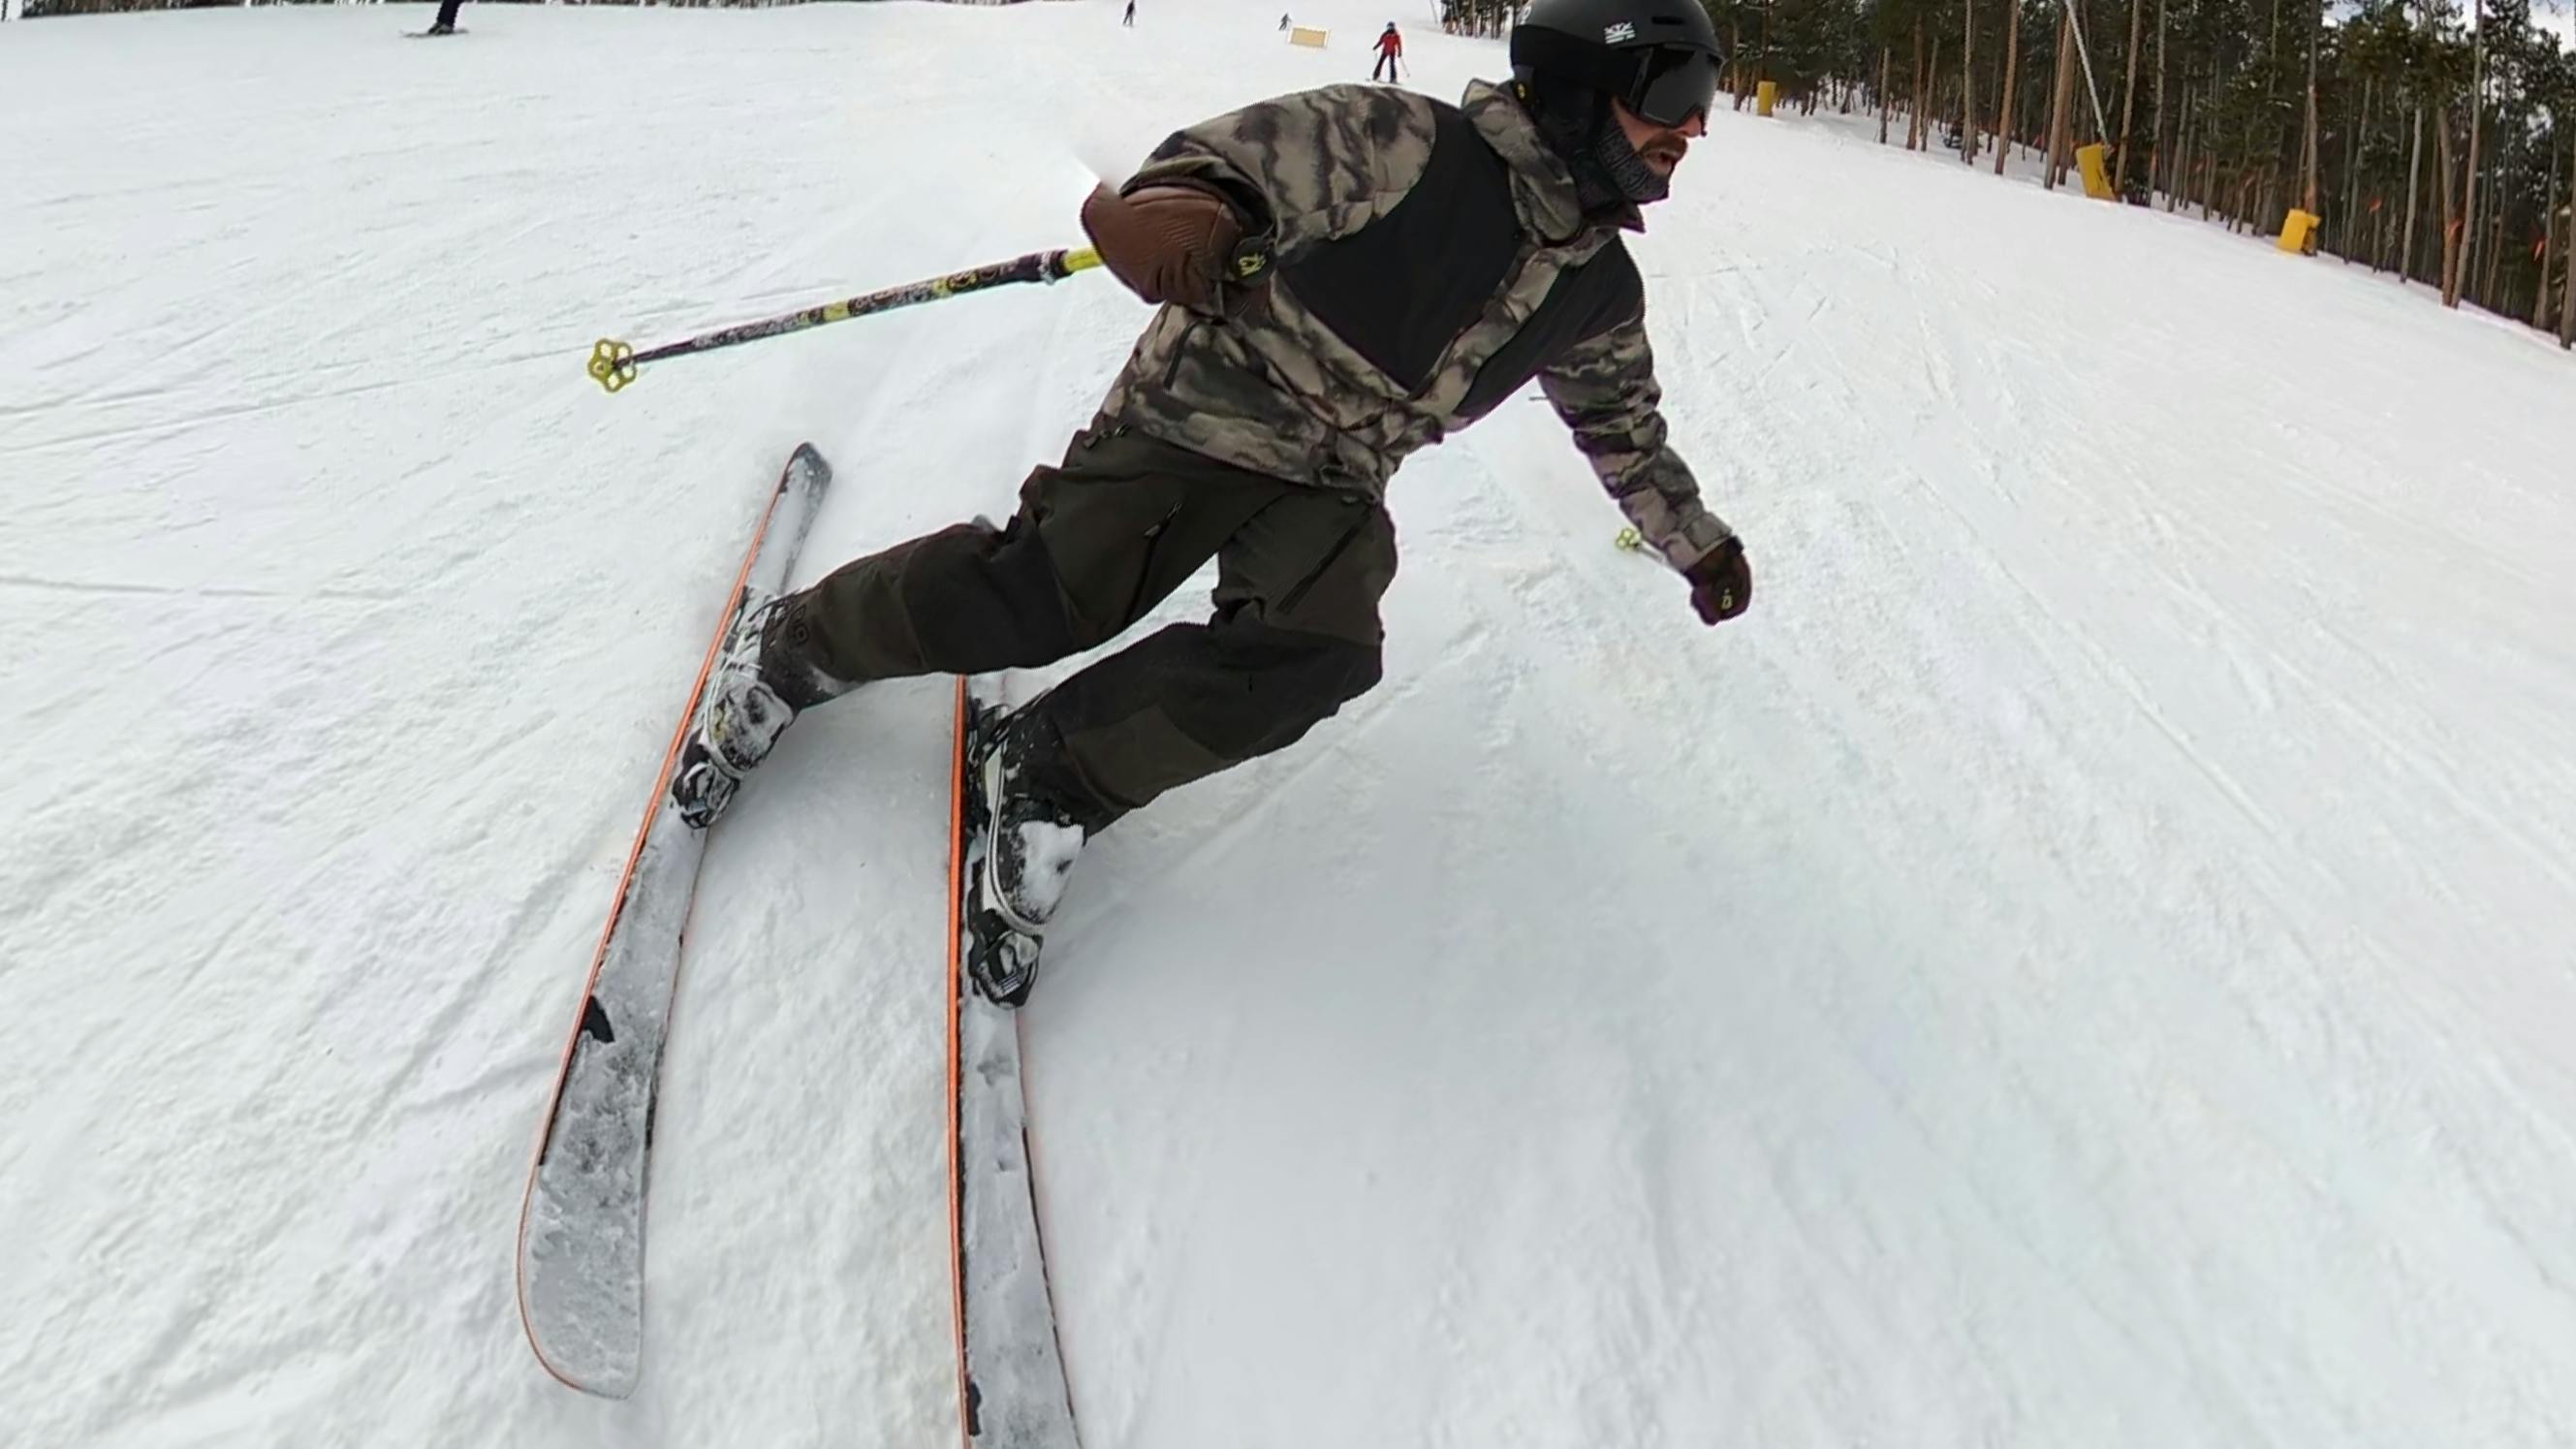 A skier on the Decathlon Rookie 90 Skis. 